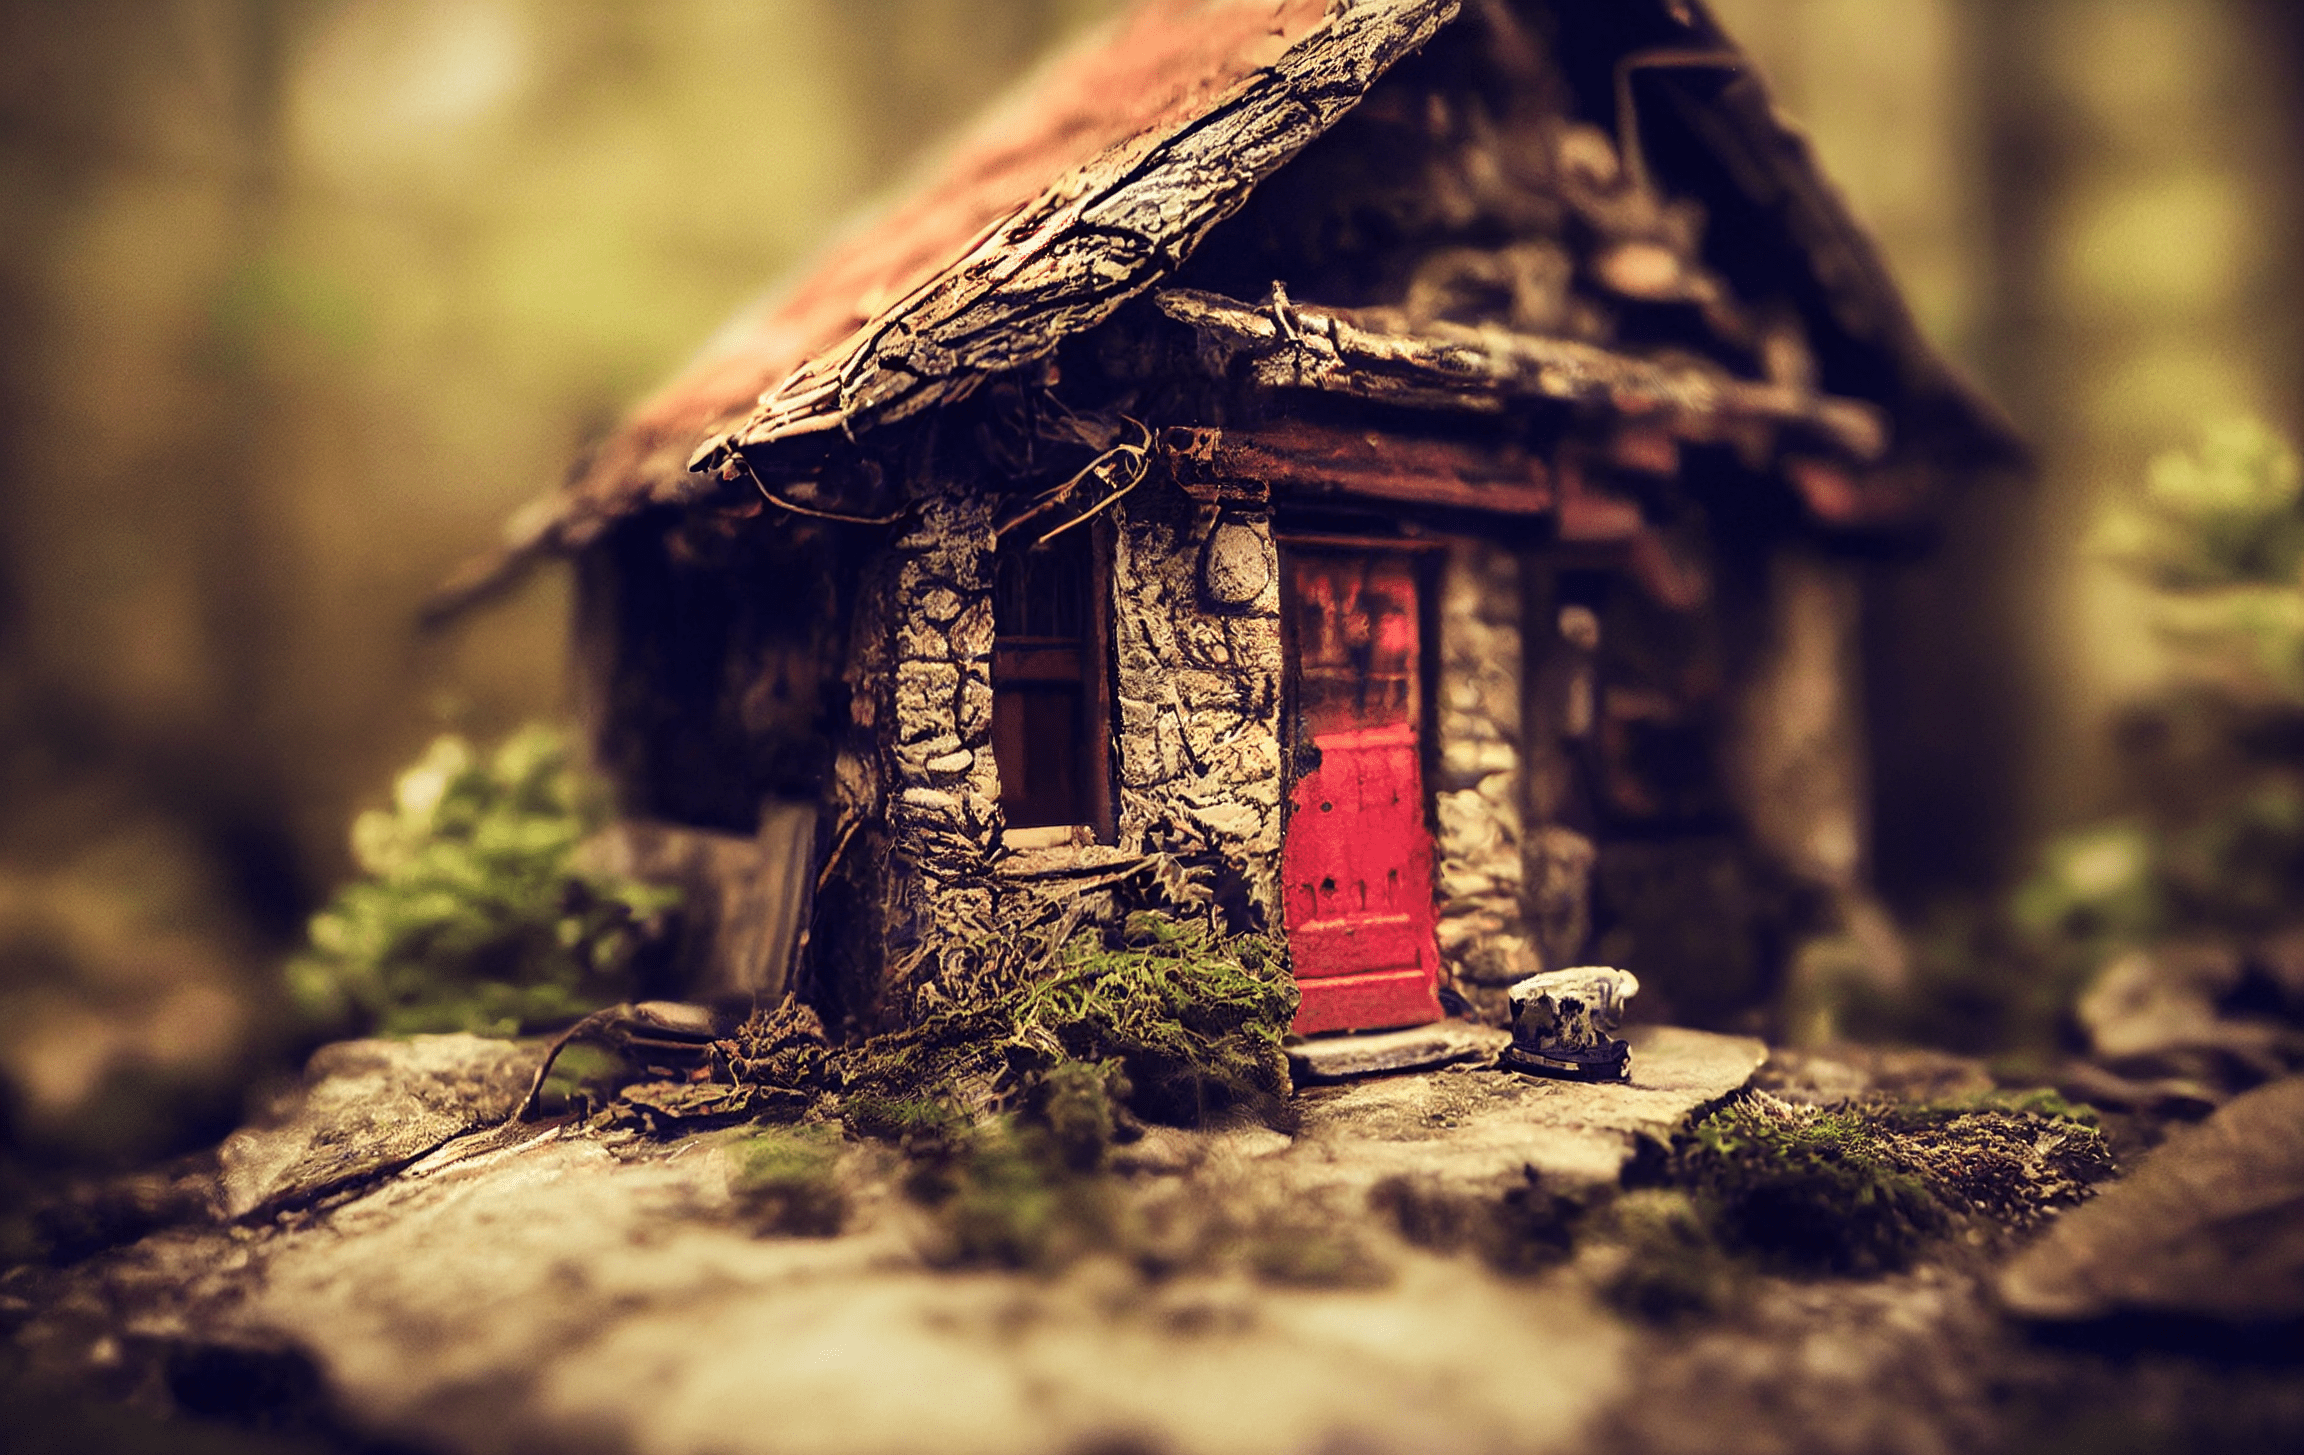 Way back a year ago – Cabincore minicabin with a red door